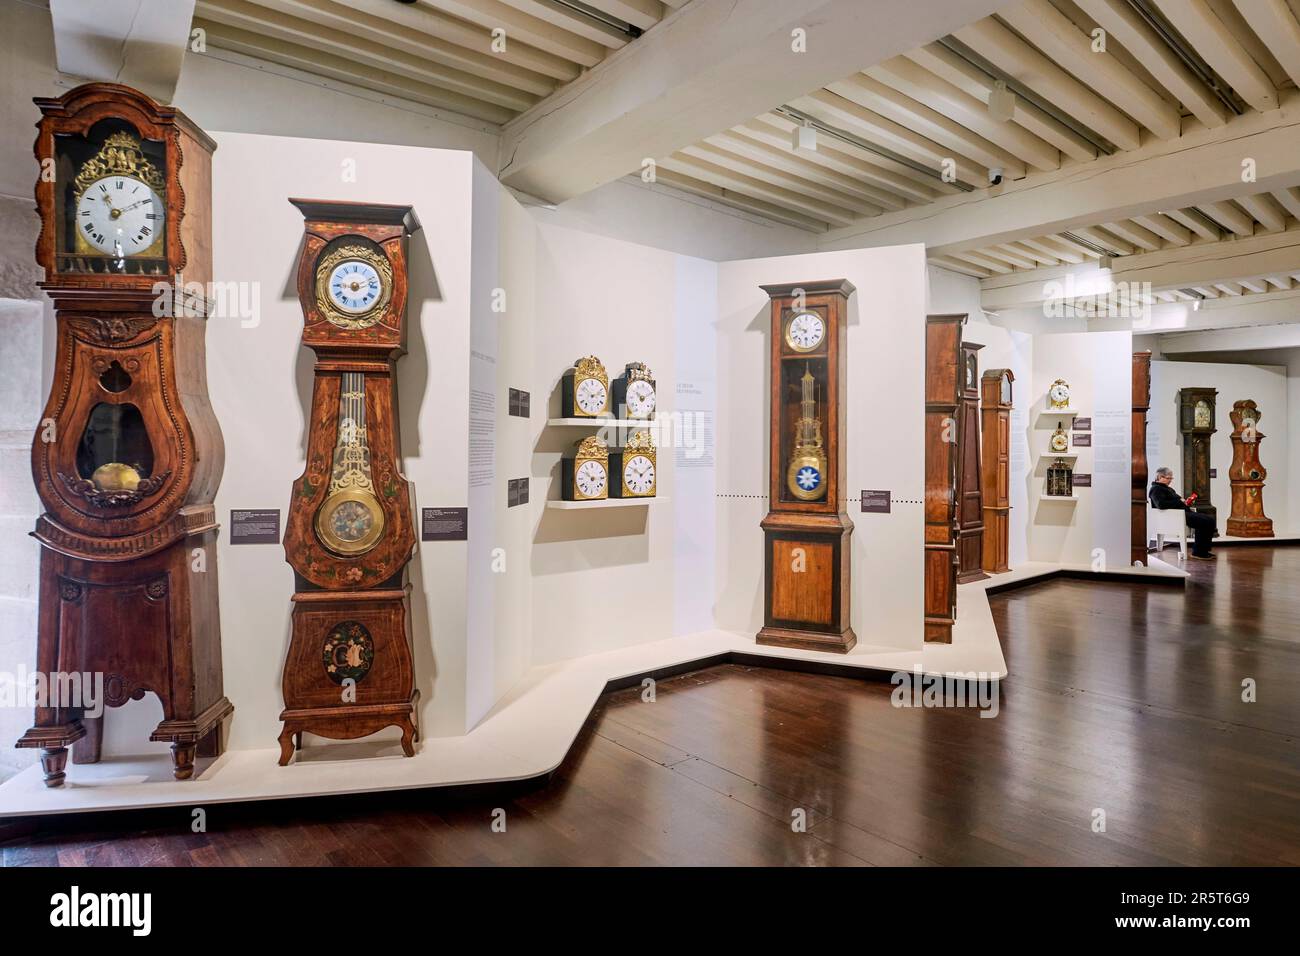 France, Doubs, Besancon, the historic center, Grande rue, Granvelle Palace from the 16th century, Time museum, Collection of Comtois clocks Stock Photo